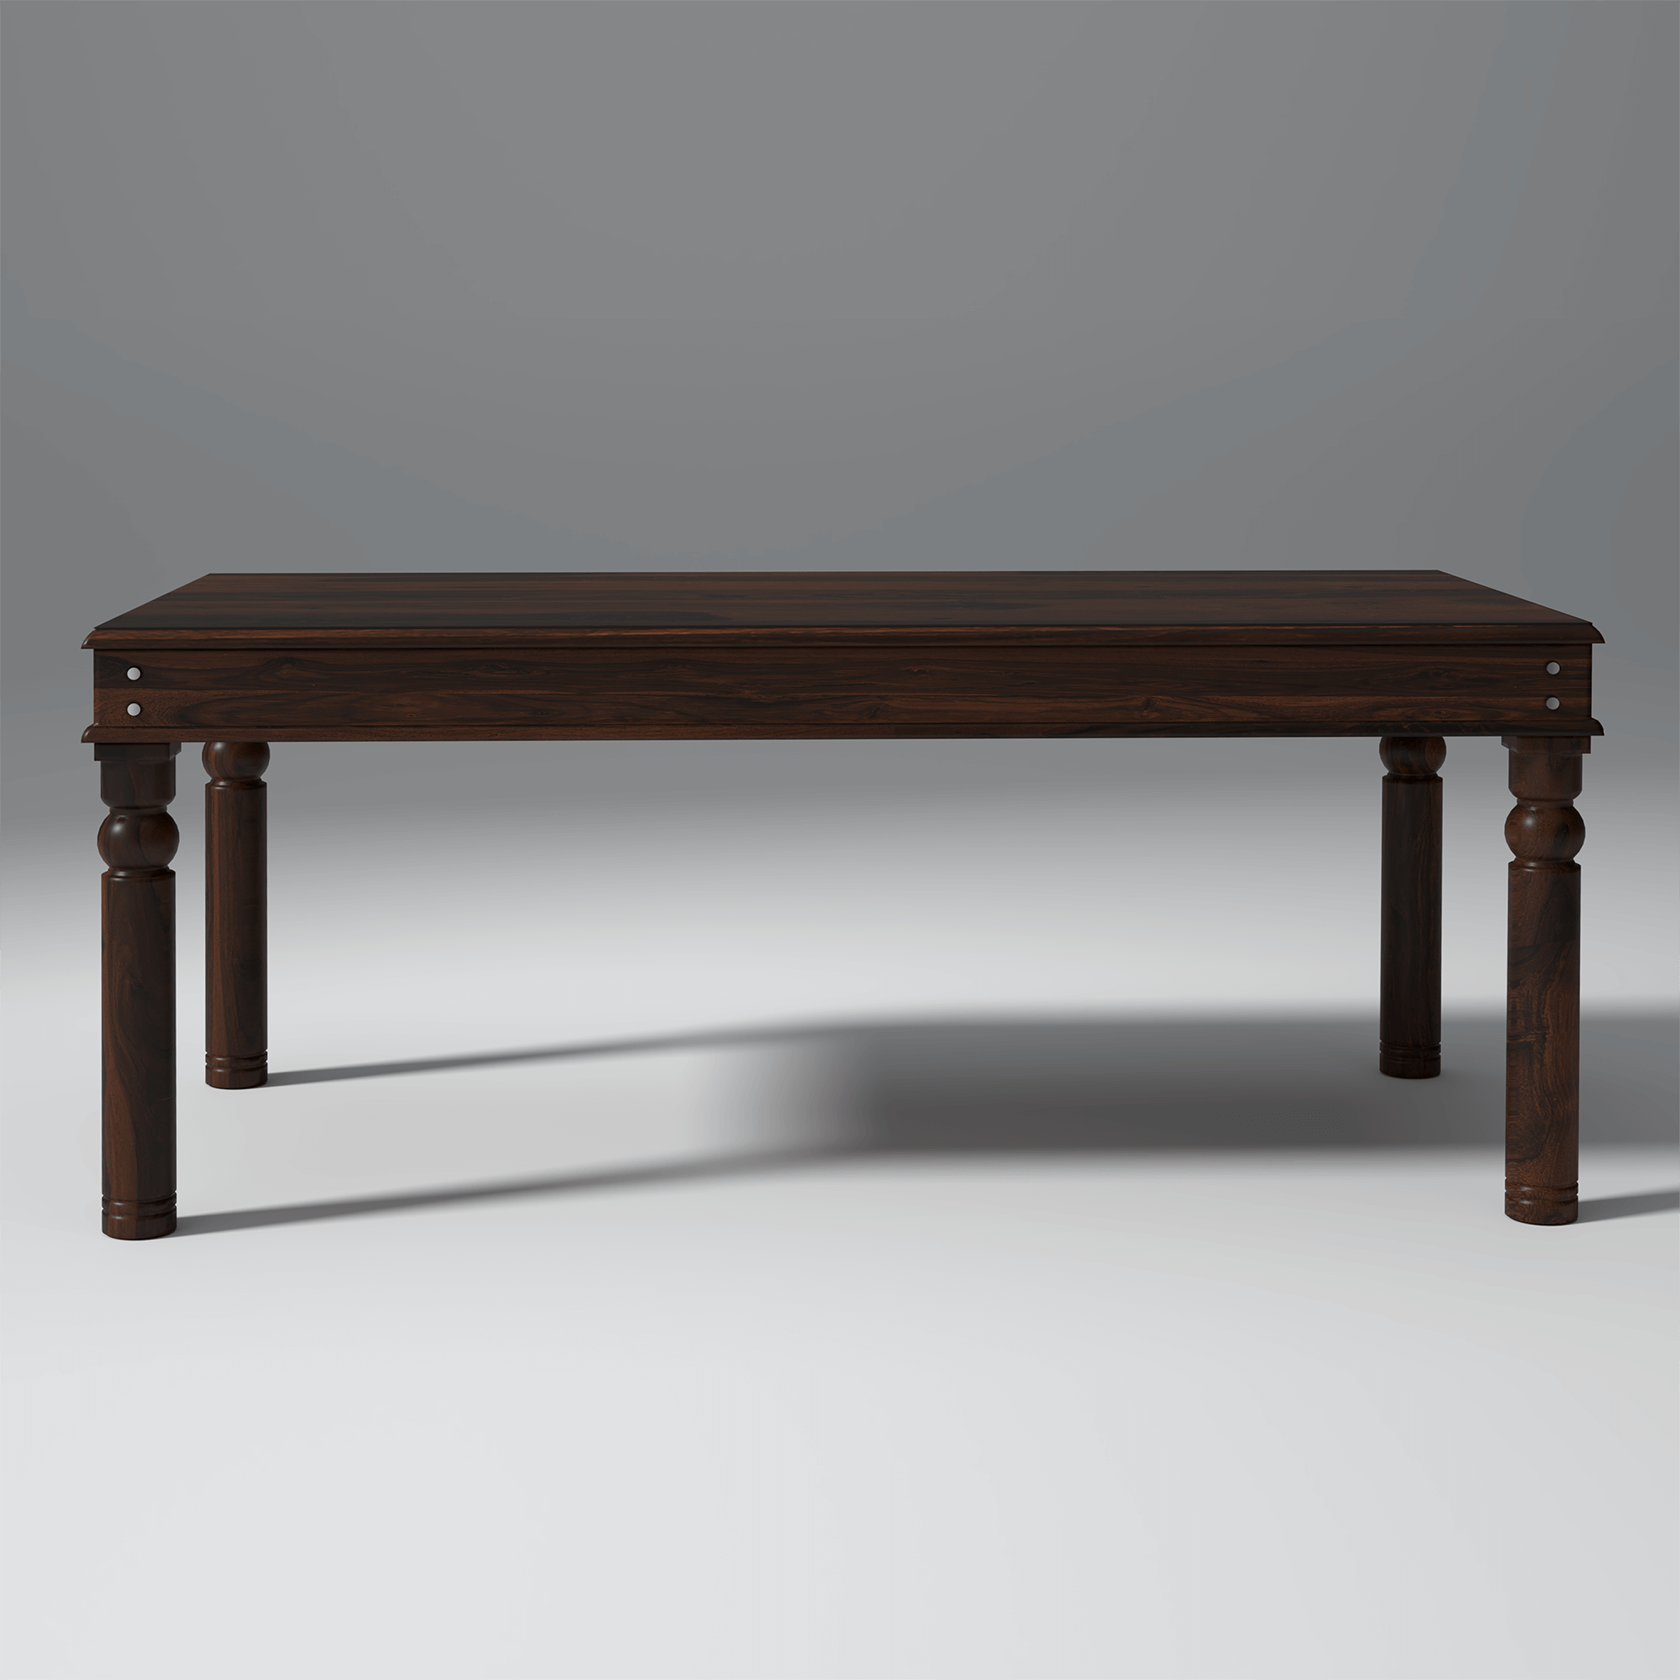 Adria Sheesham Wood Dining Table 6 Seater In Walnut